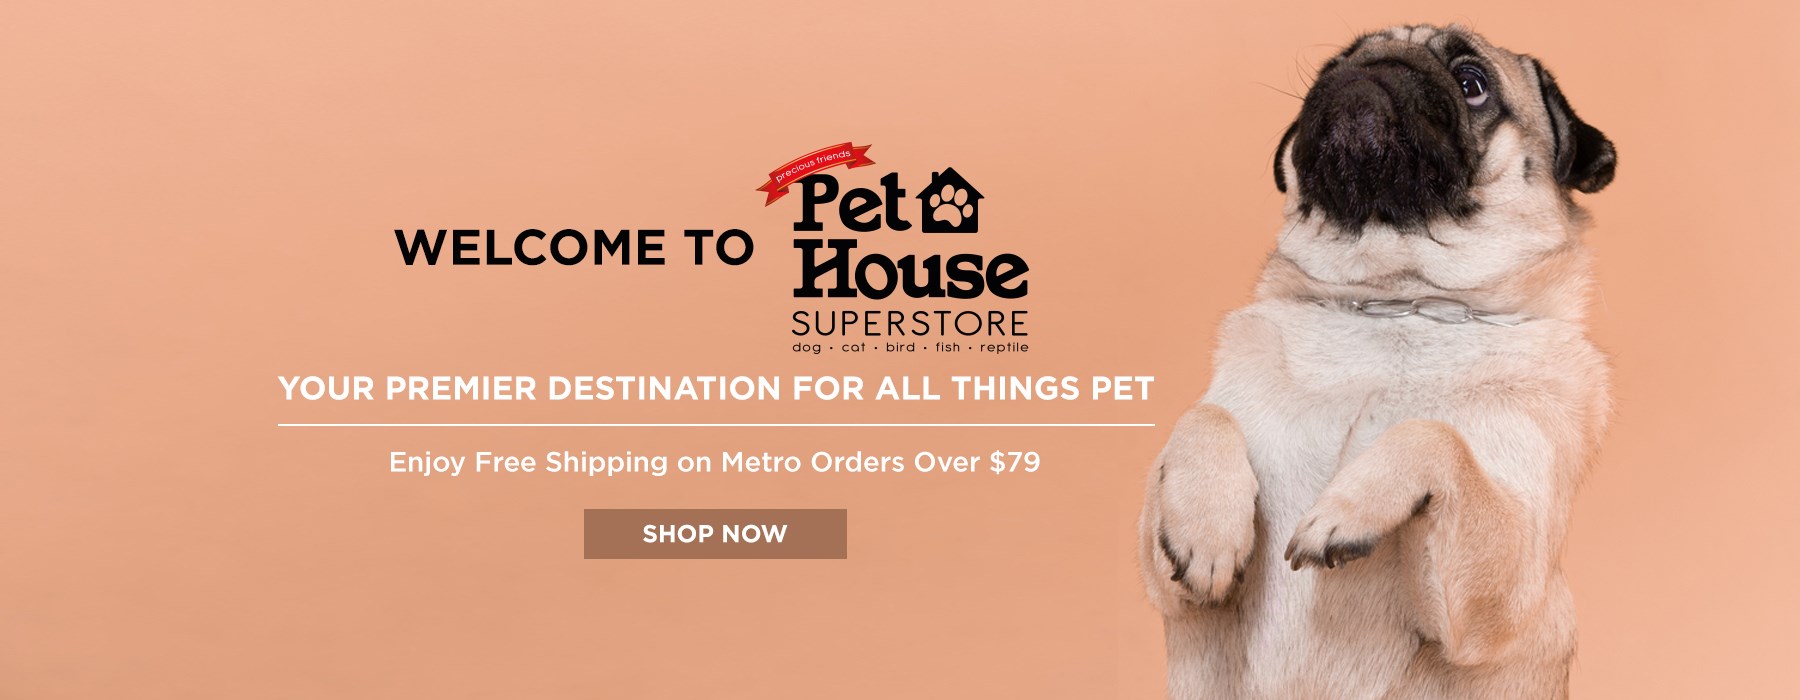 $10 OFF when you sign up at Pet House